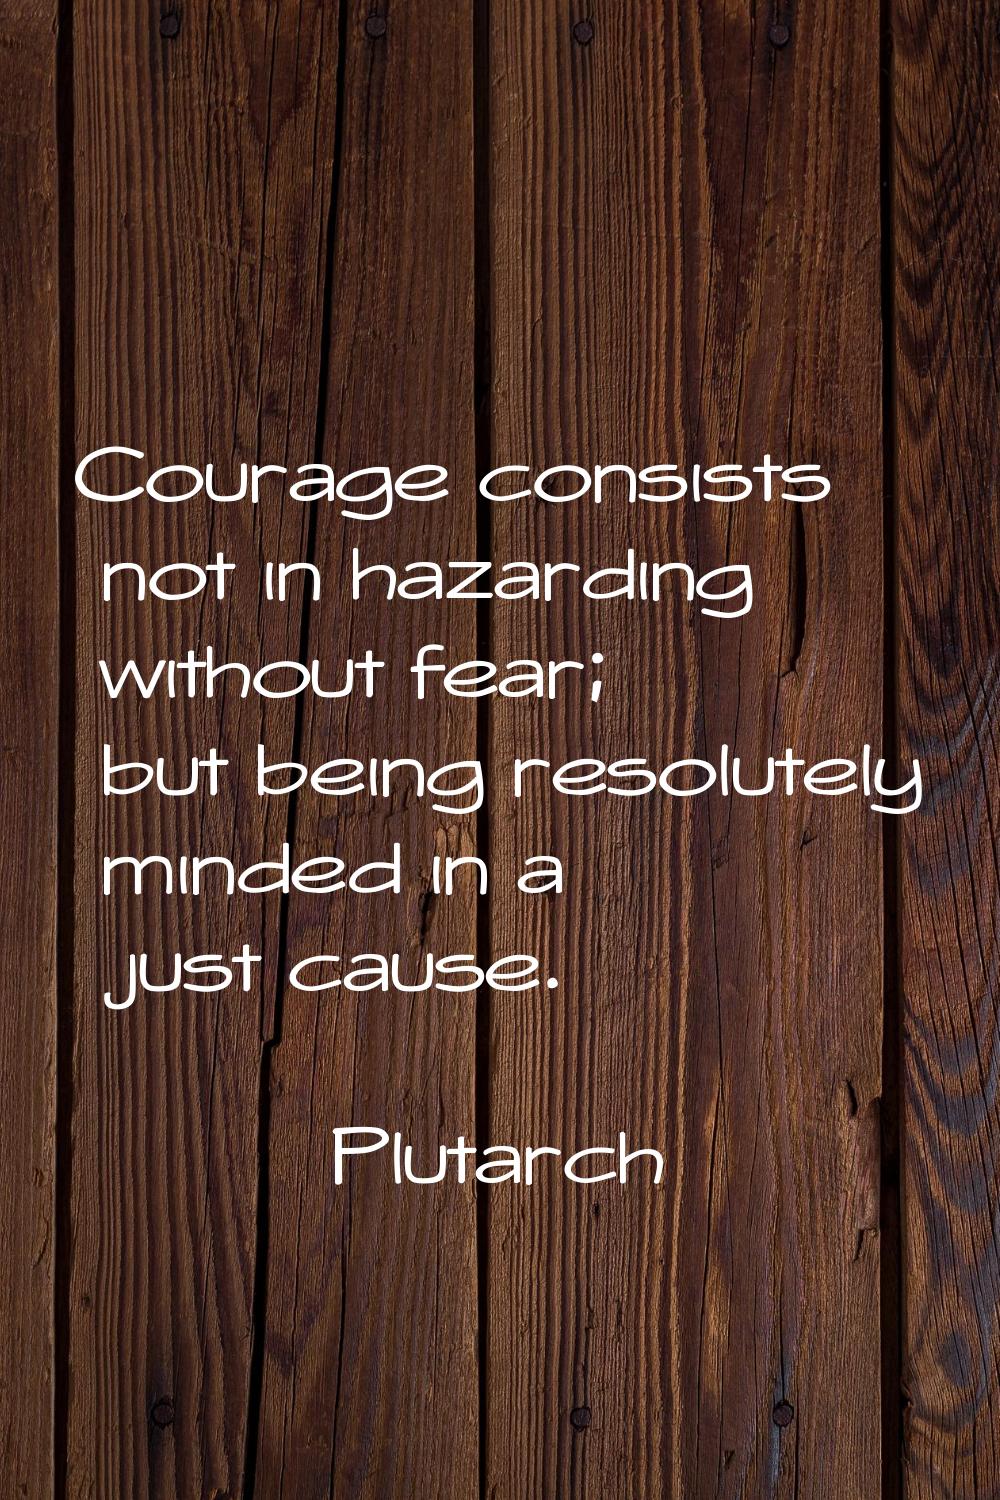 Courage consists not in hazarding without fear; but being resolutely minded in a just cause.